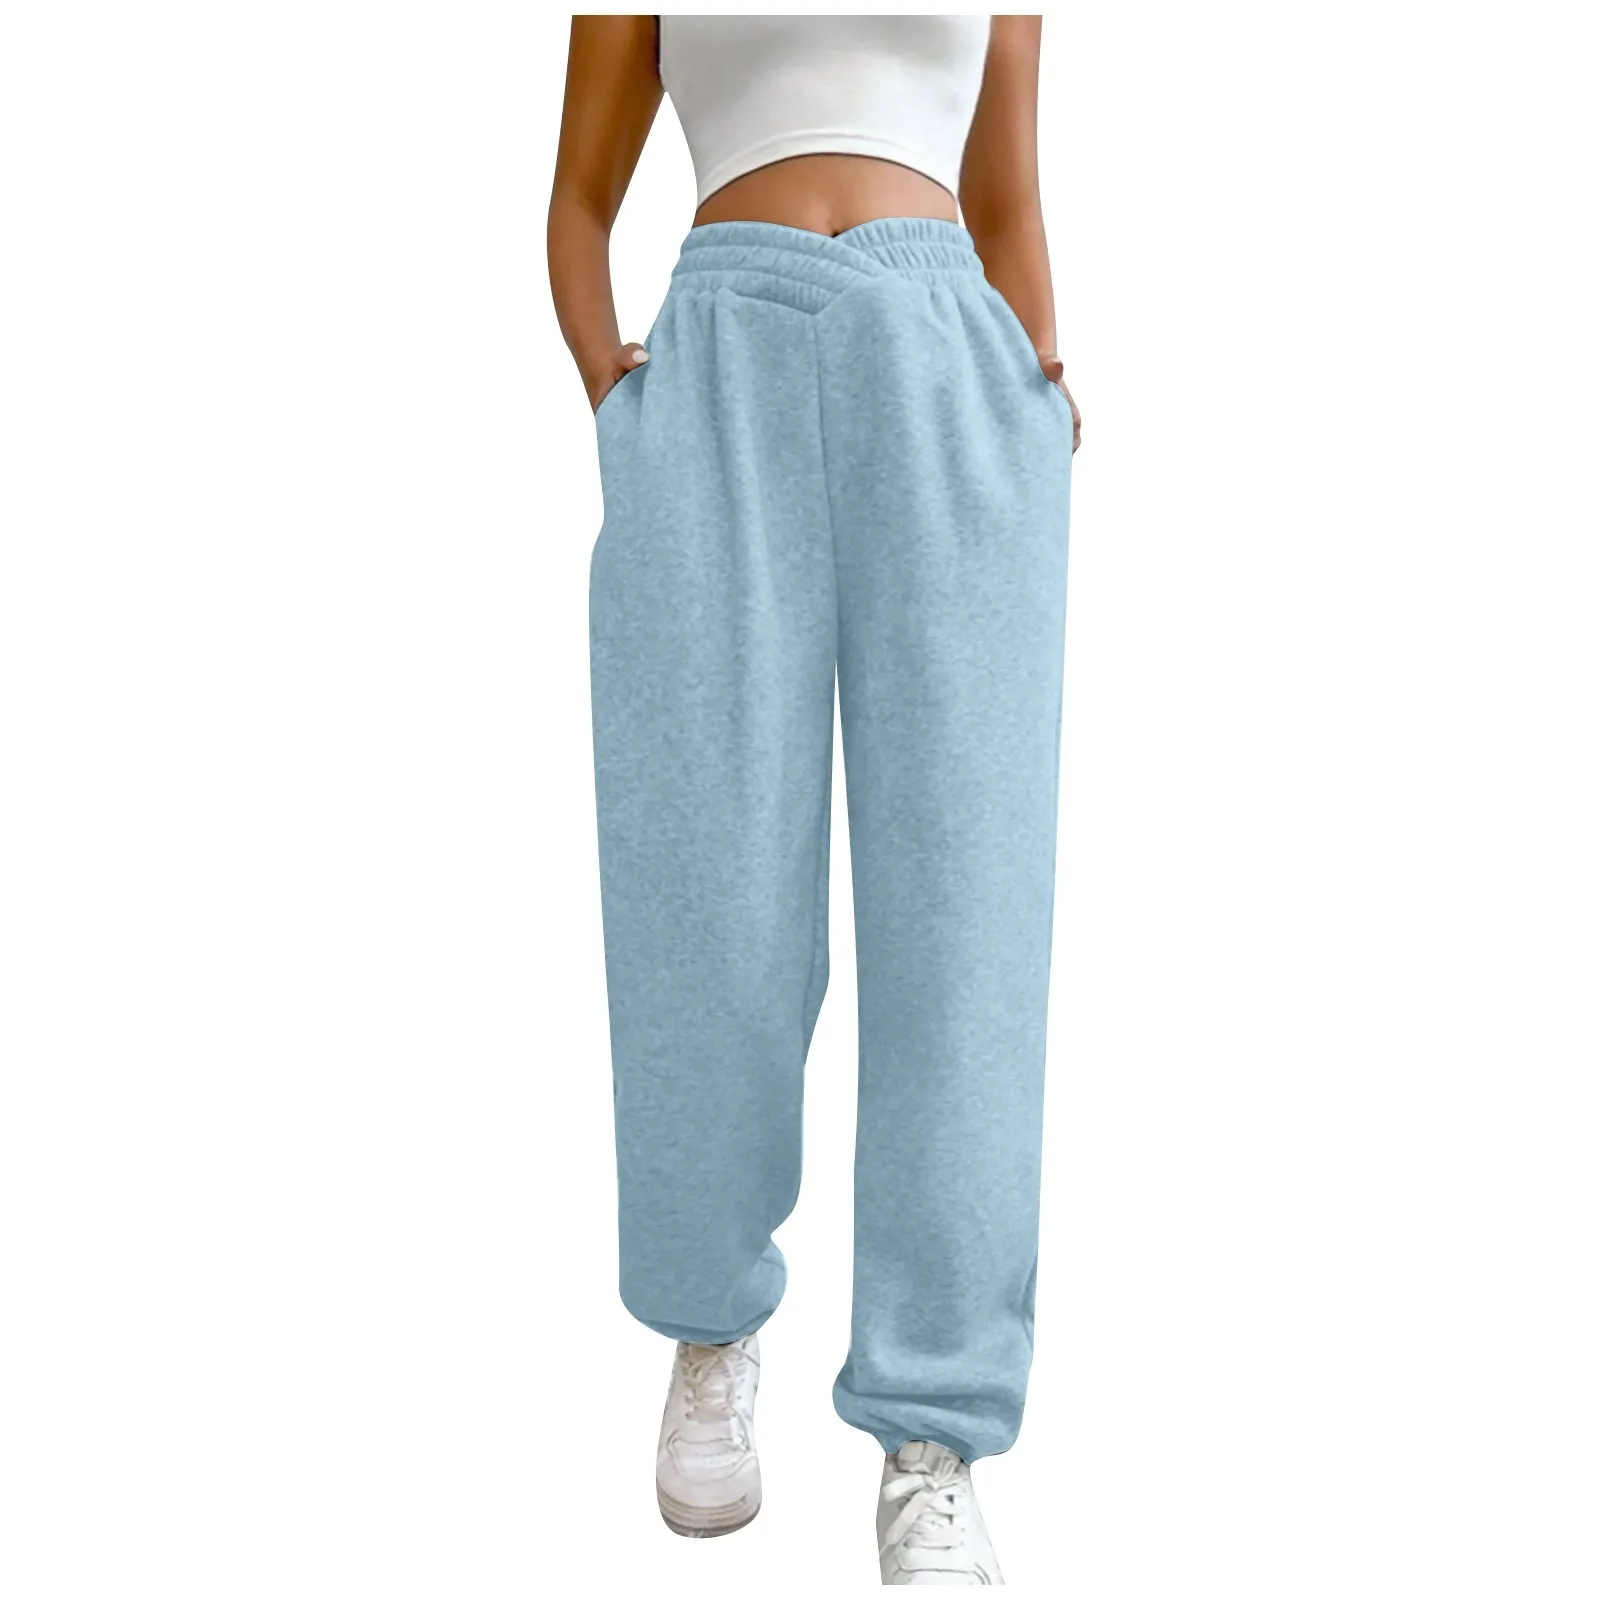 

Women'S High Waist Solid Color Casual Trousers Workout Sports Joggers Pants With Pockets Causal Full Length Trousers Vintage